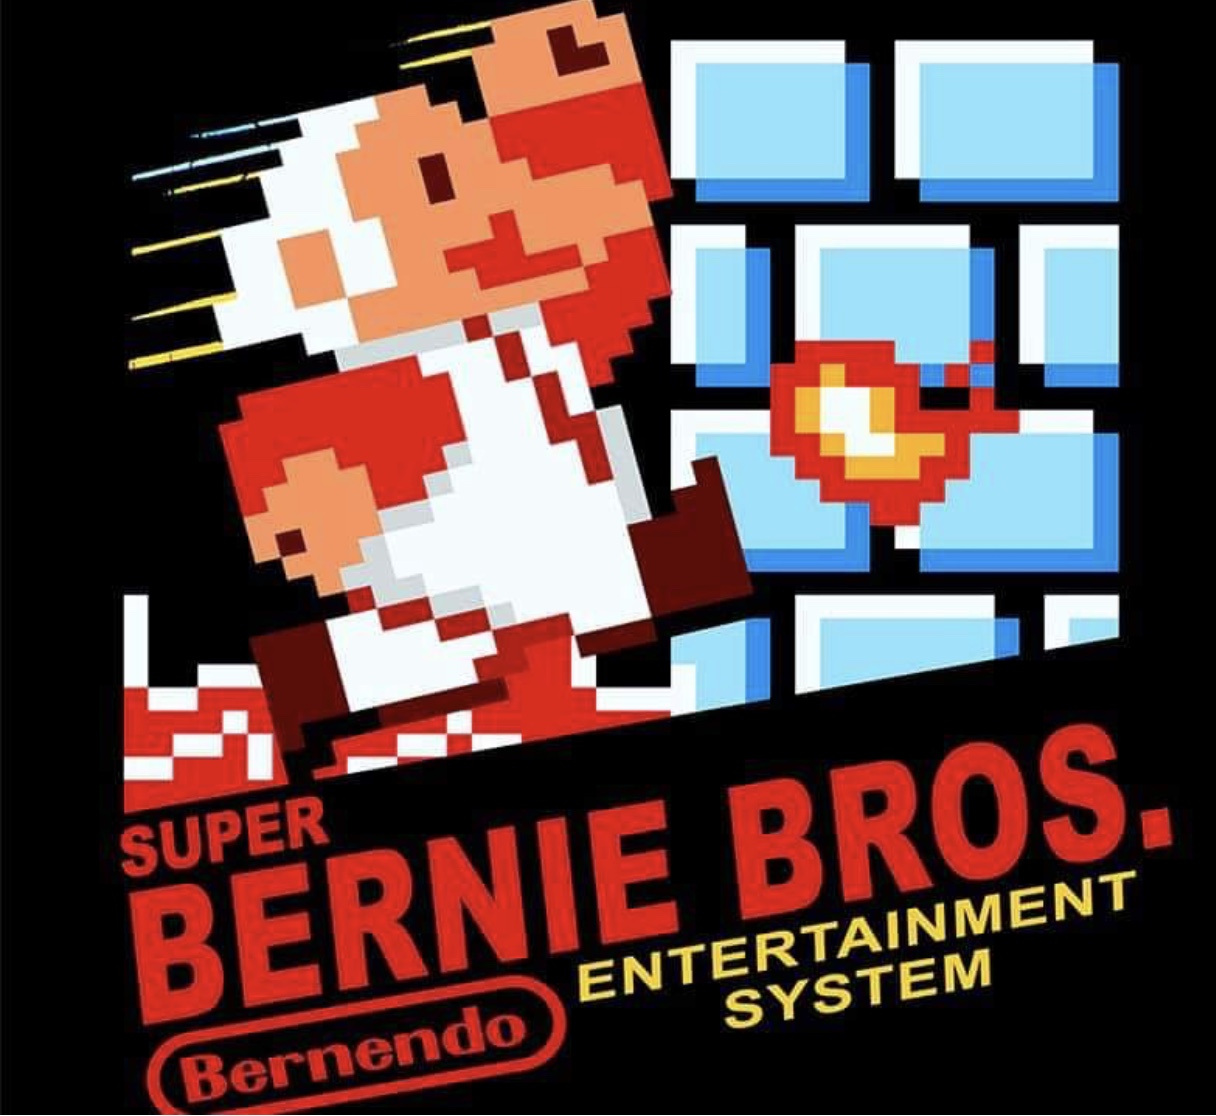 Available Wherever Bernendo Games Are Sold